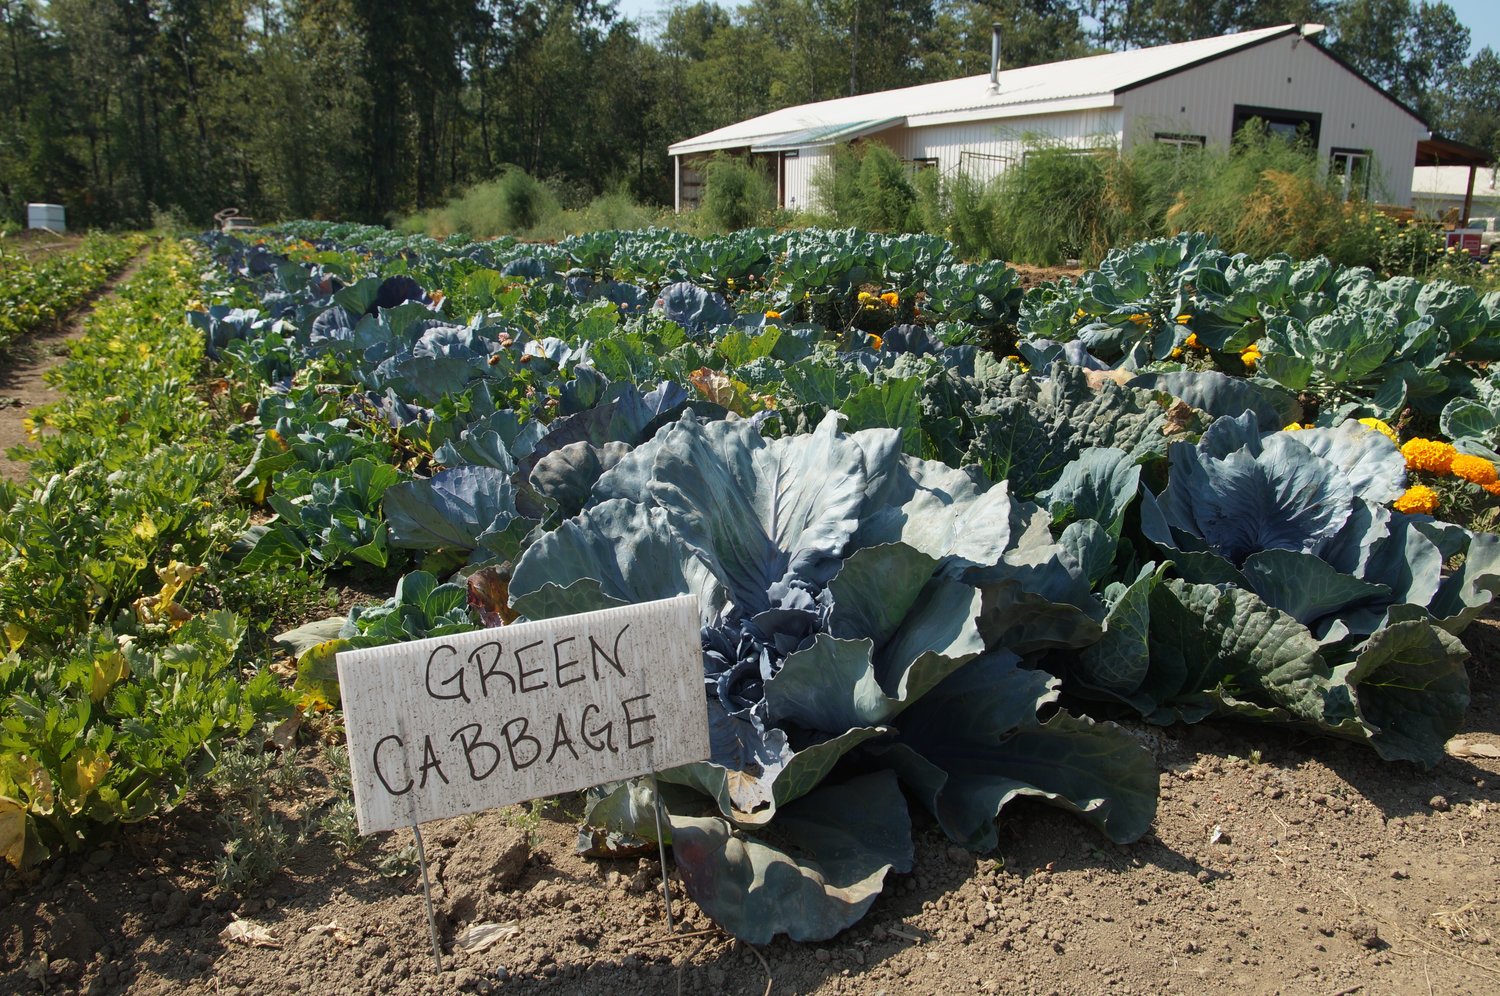 Cabbage is one of many vegetables being grown on Home Farm at 8020 Kickerville Road.